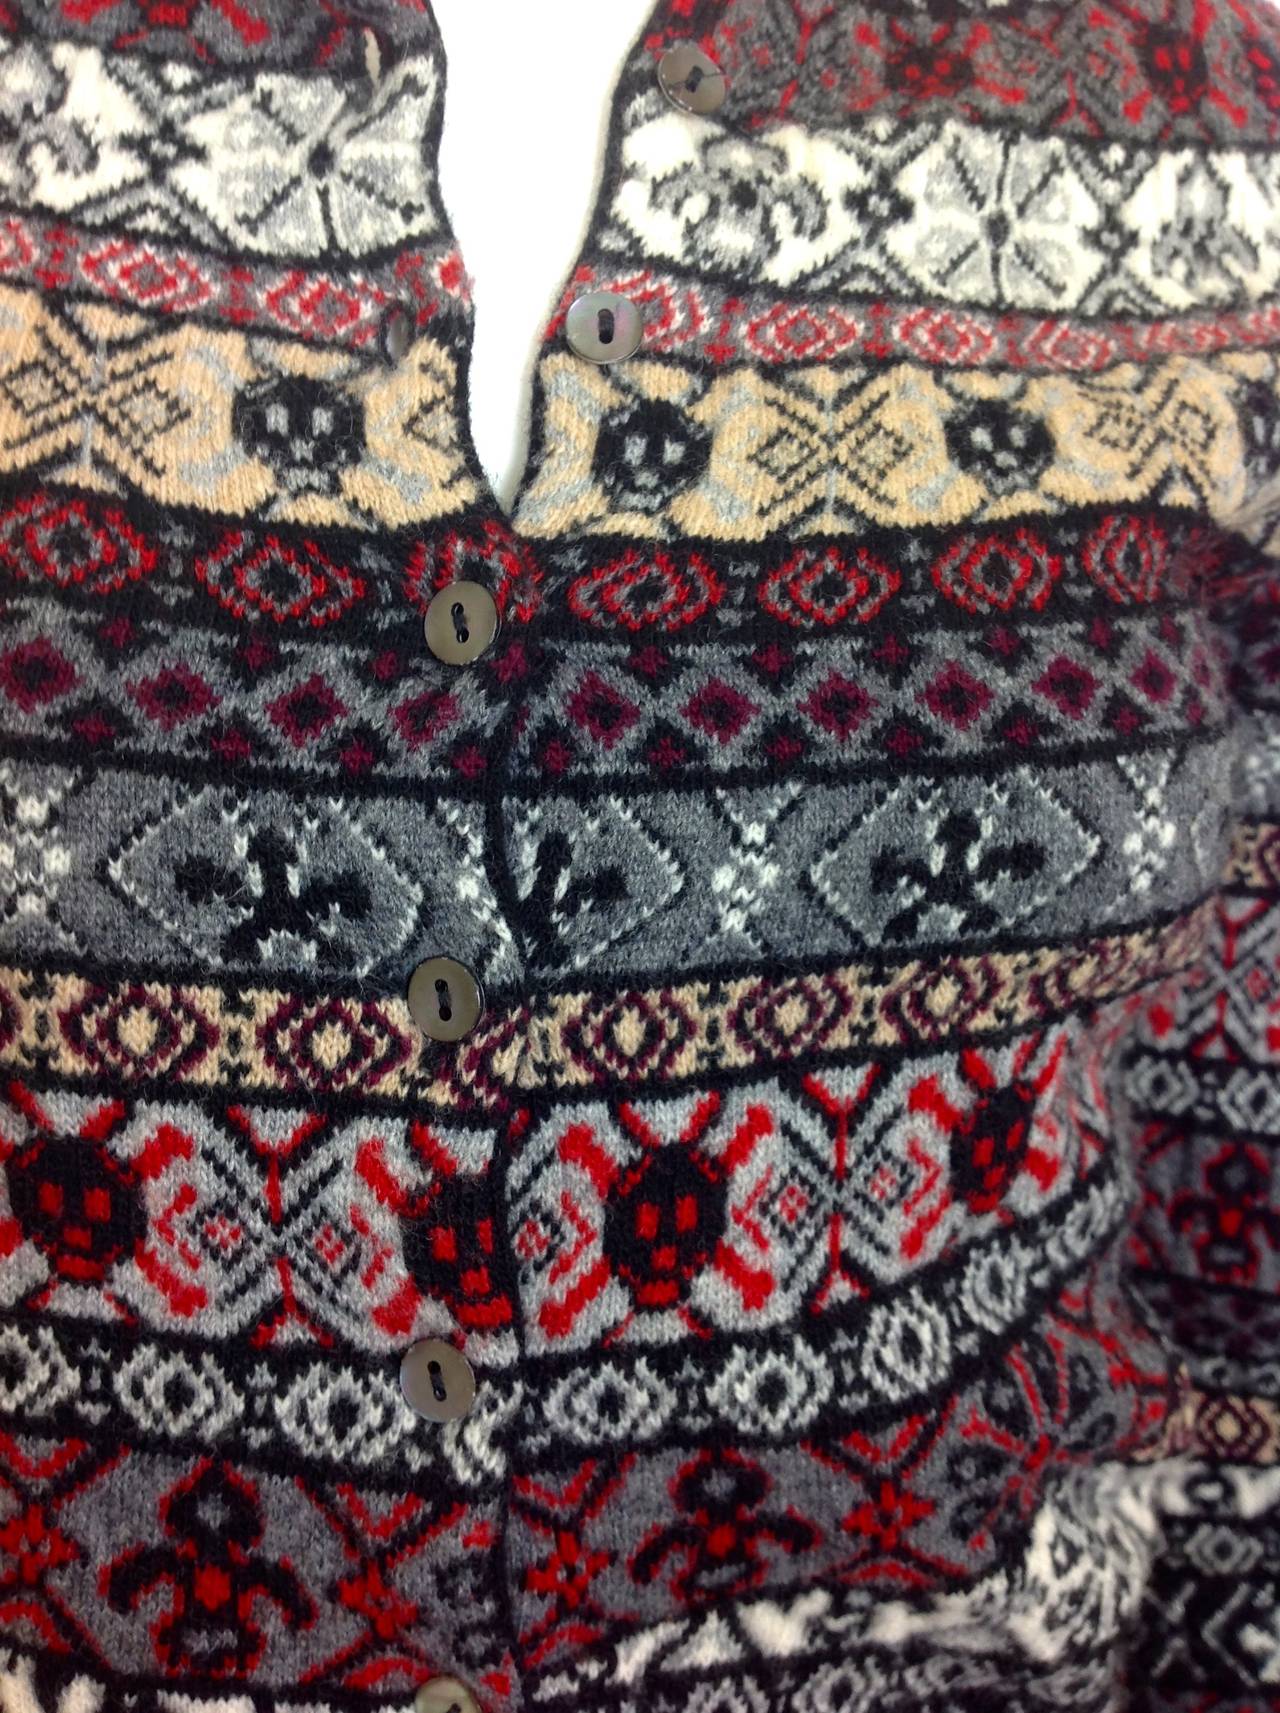 100% wool fairisle cardigan by Alexander McQueen.  McQueen's favorite patterns - skulls,and fleur de lis are woven into this stunning  sweater.
Button front - 10 mother of pearl buttons.  Size S.
Made in Italy of the softest wool. 
The inside of